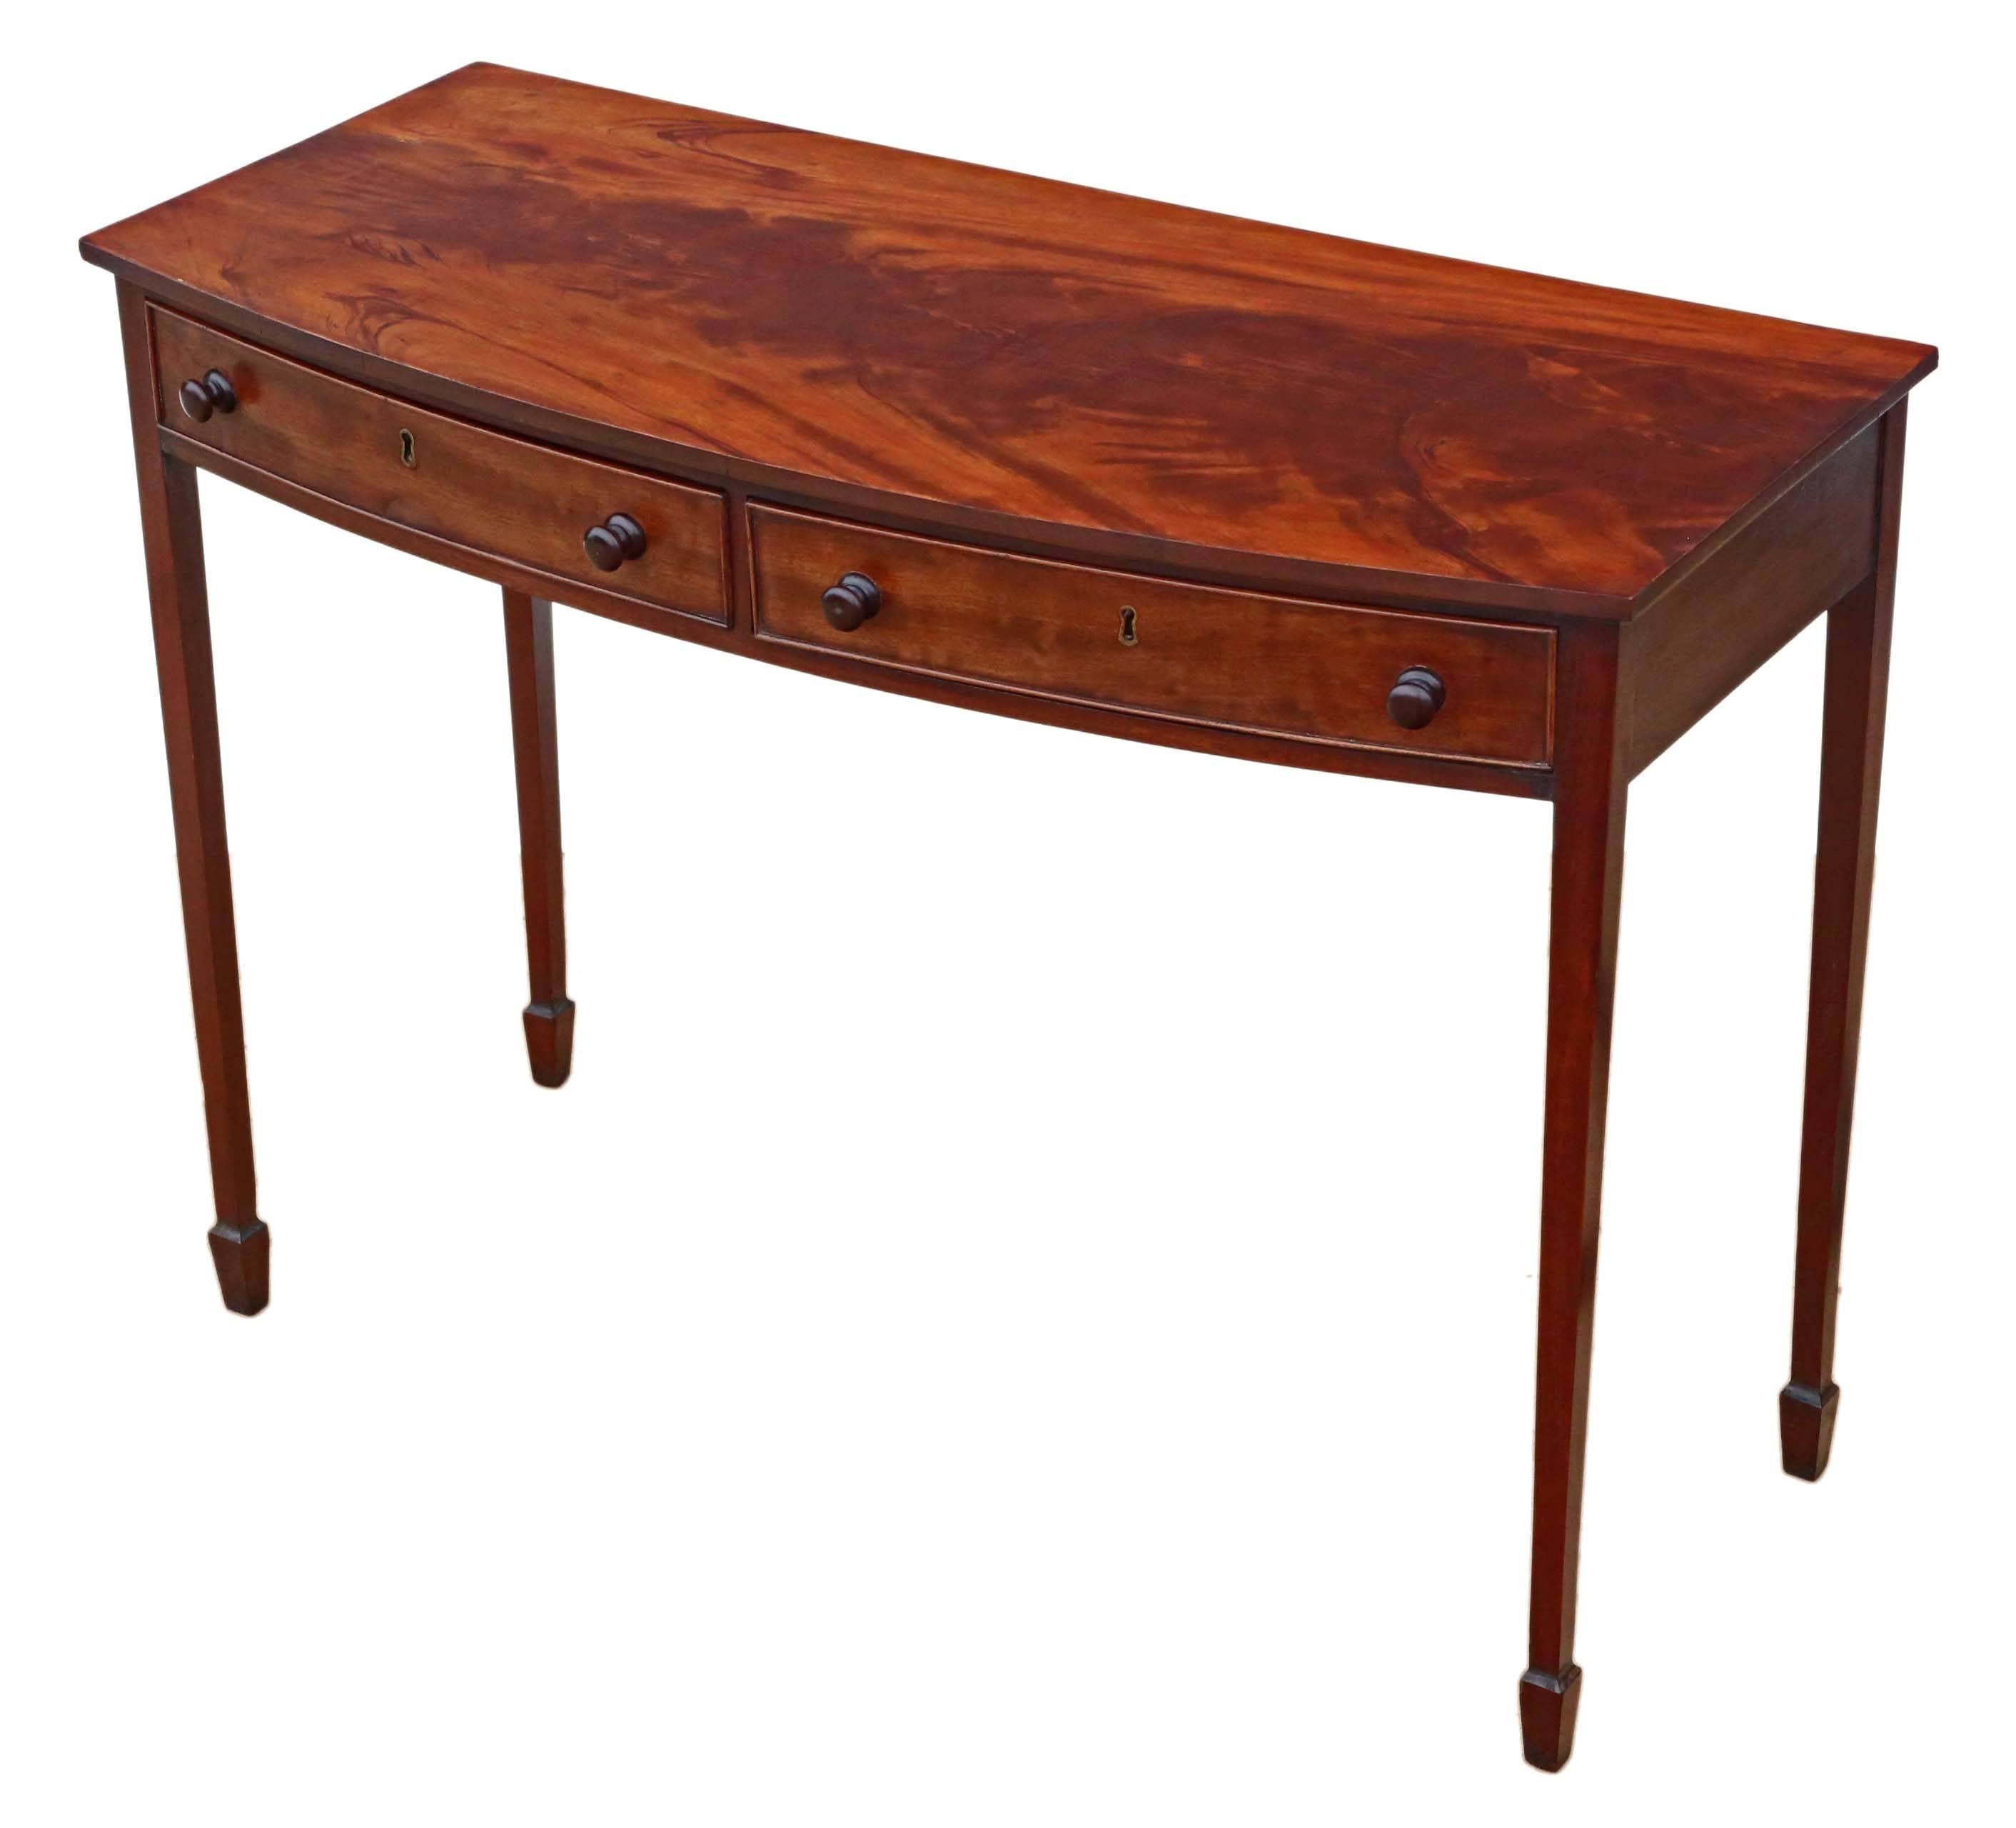 Antique Quality Bow Front Mahogany Desk Writing Table 19th Century and Later In Good Condition For Sale In Wisbech, Walton Wisbech